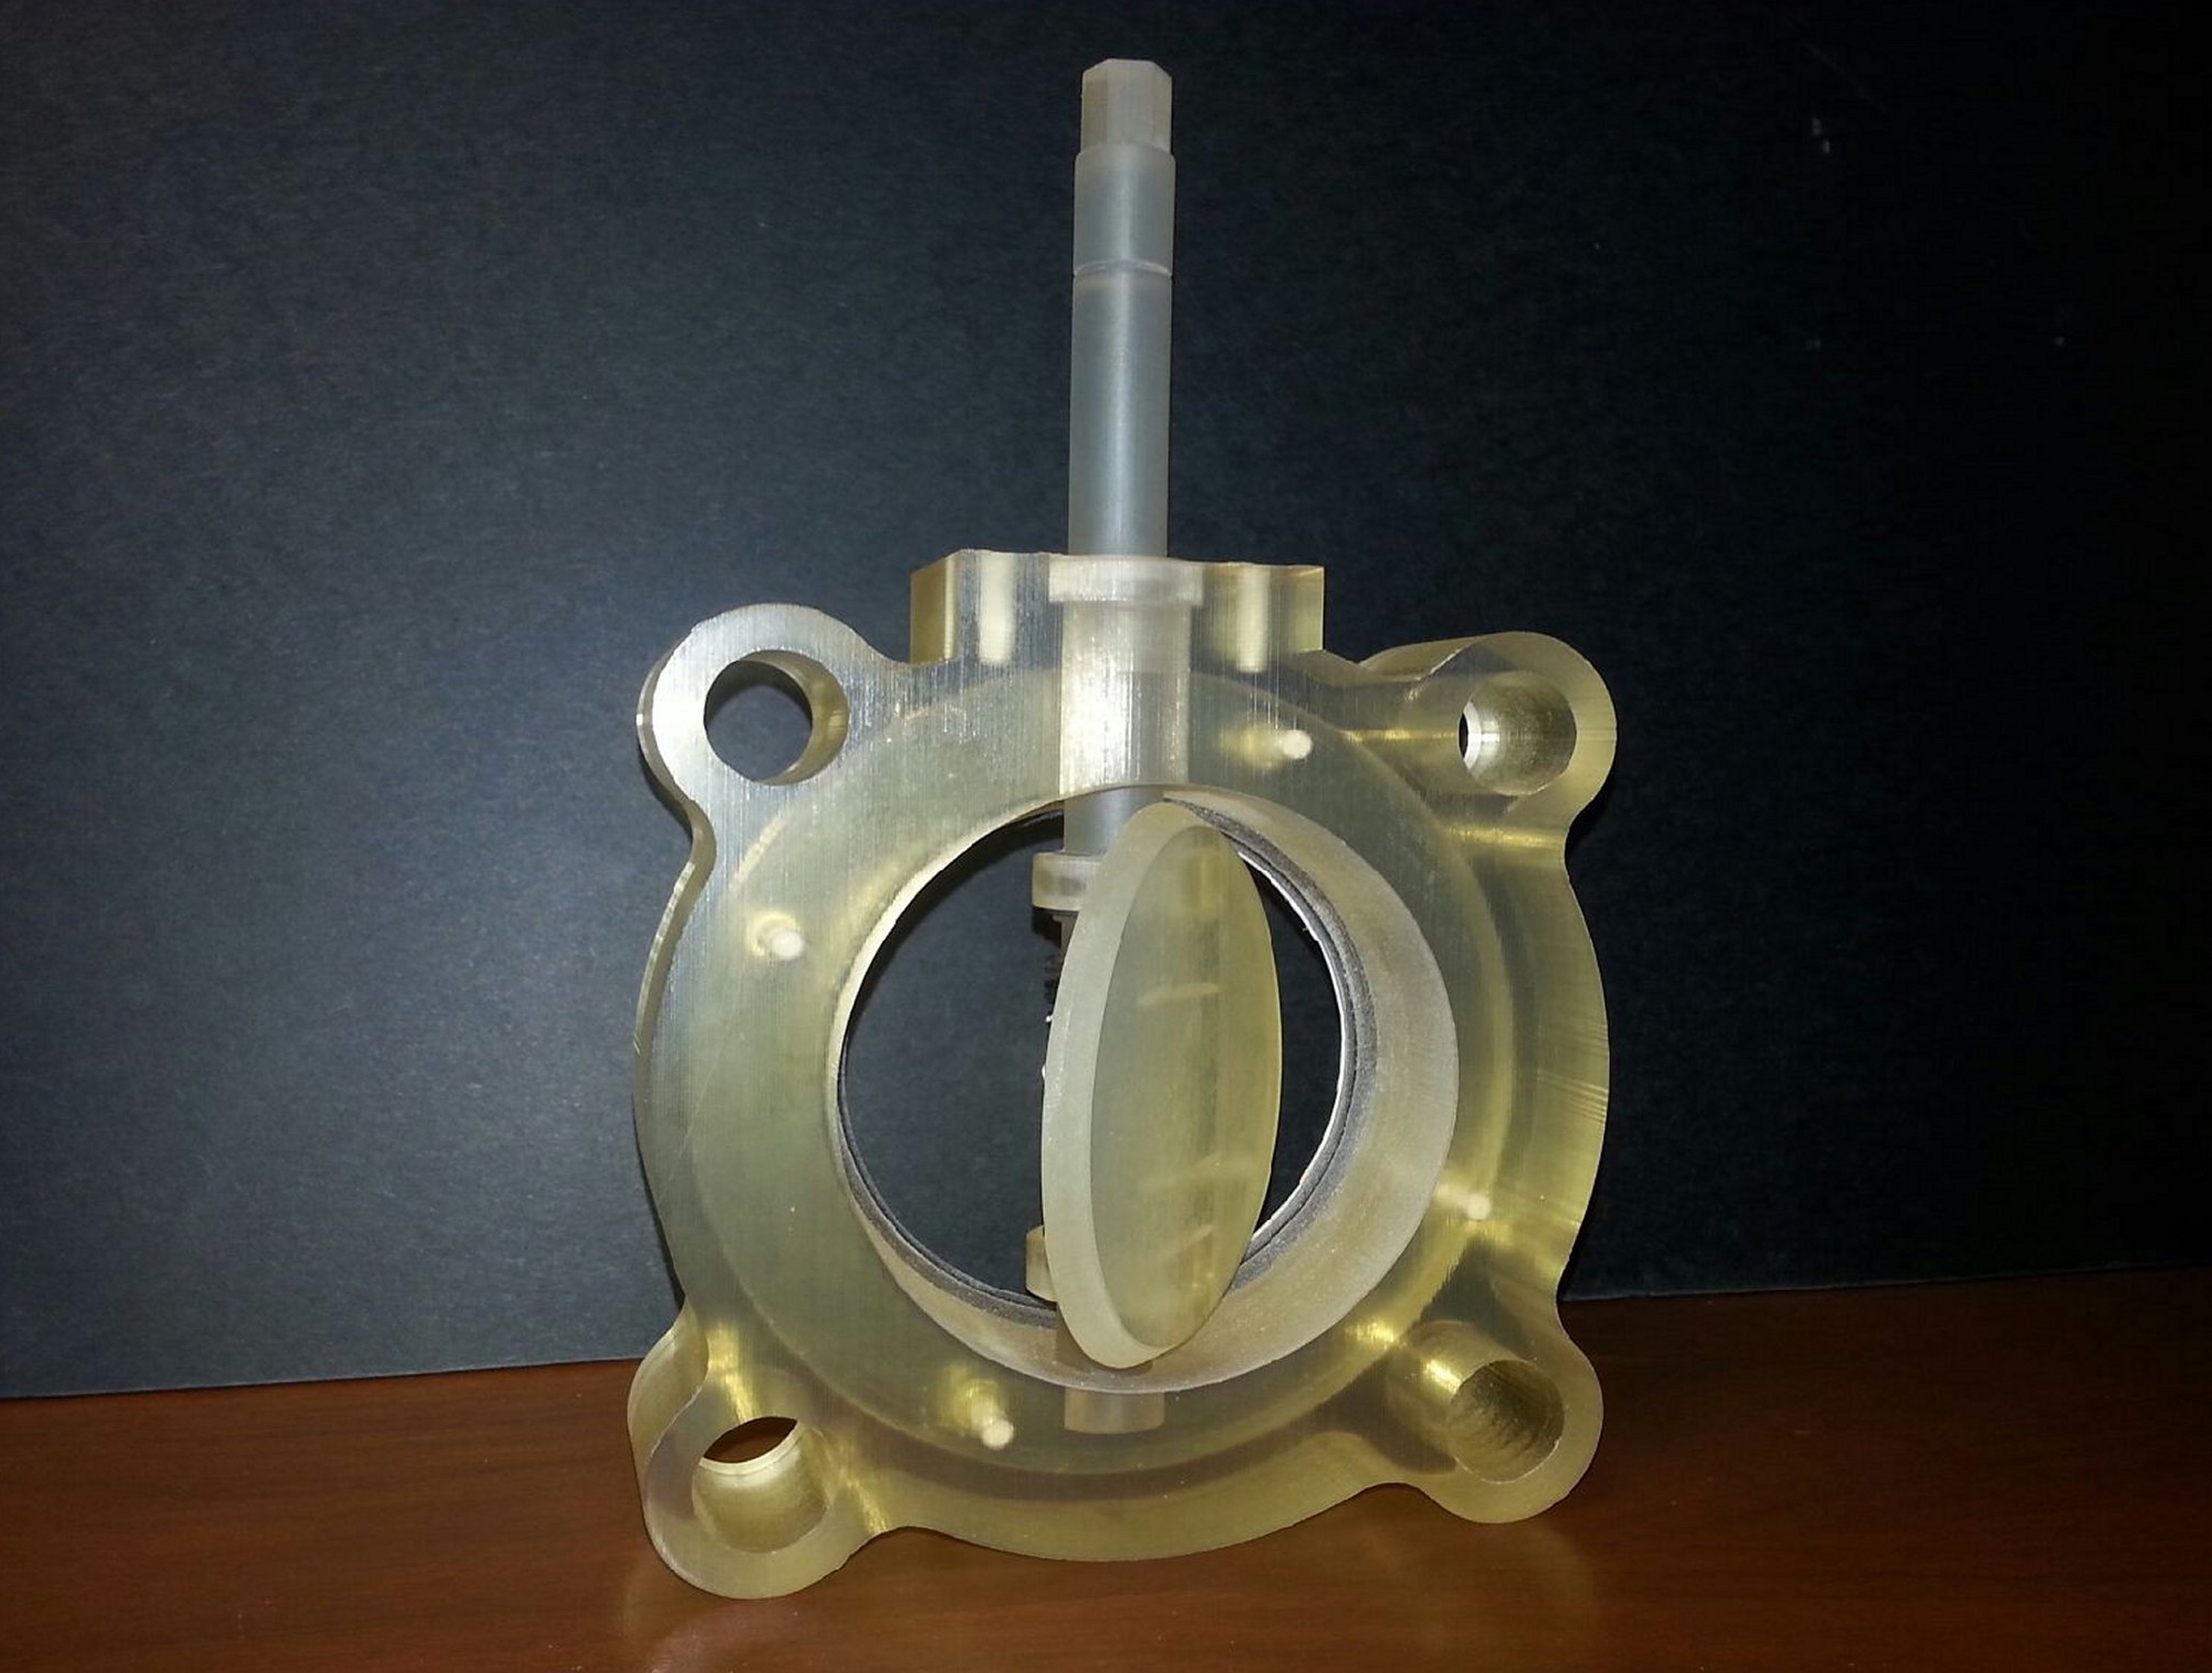 3-D printed prototype of Cryogenic Cam Butterfly Valve
